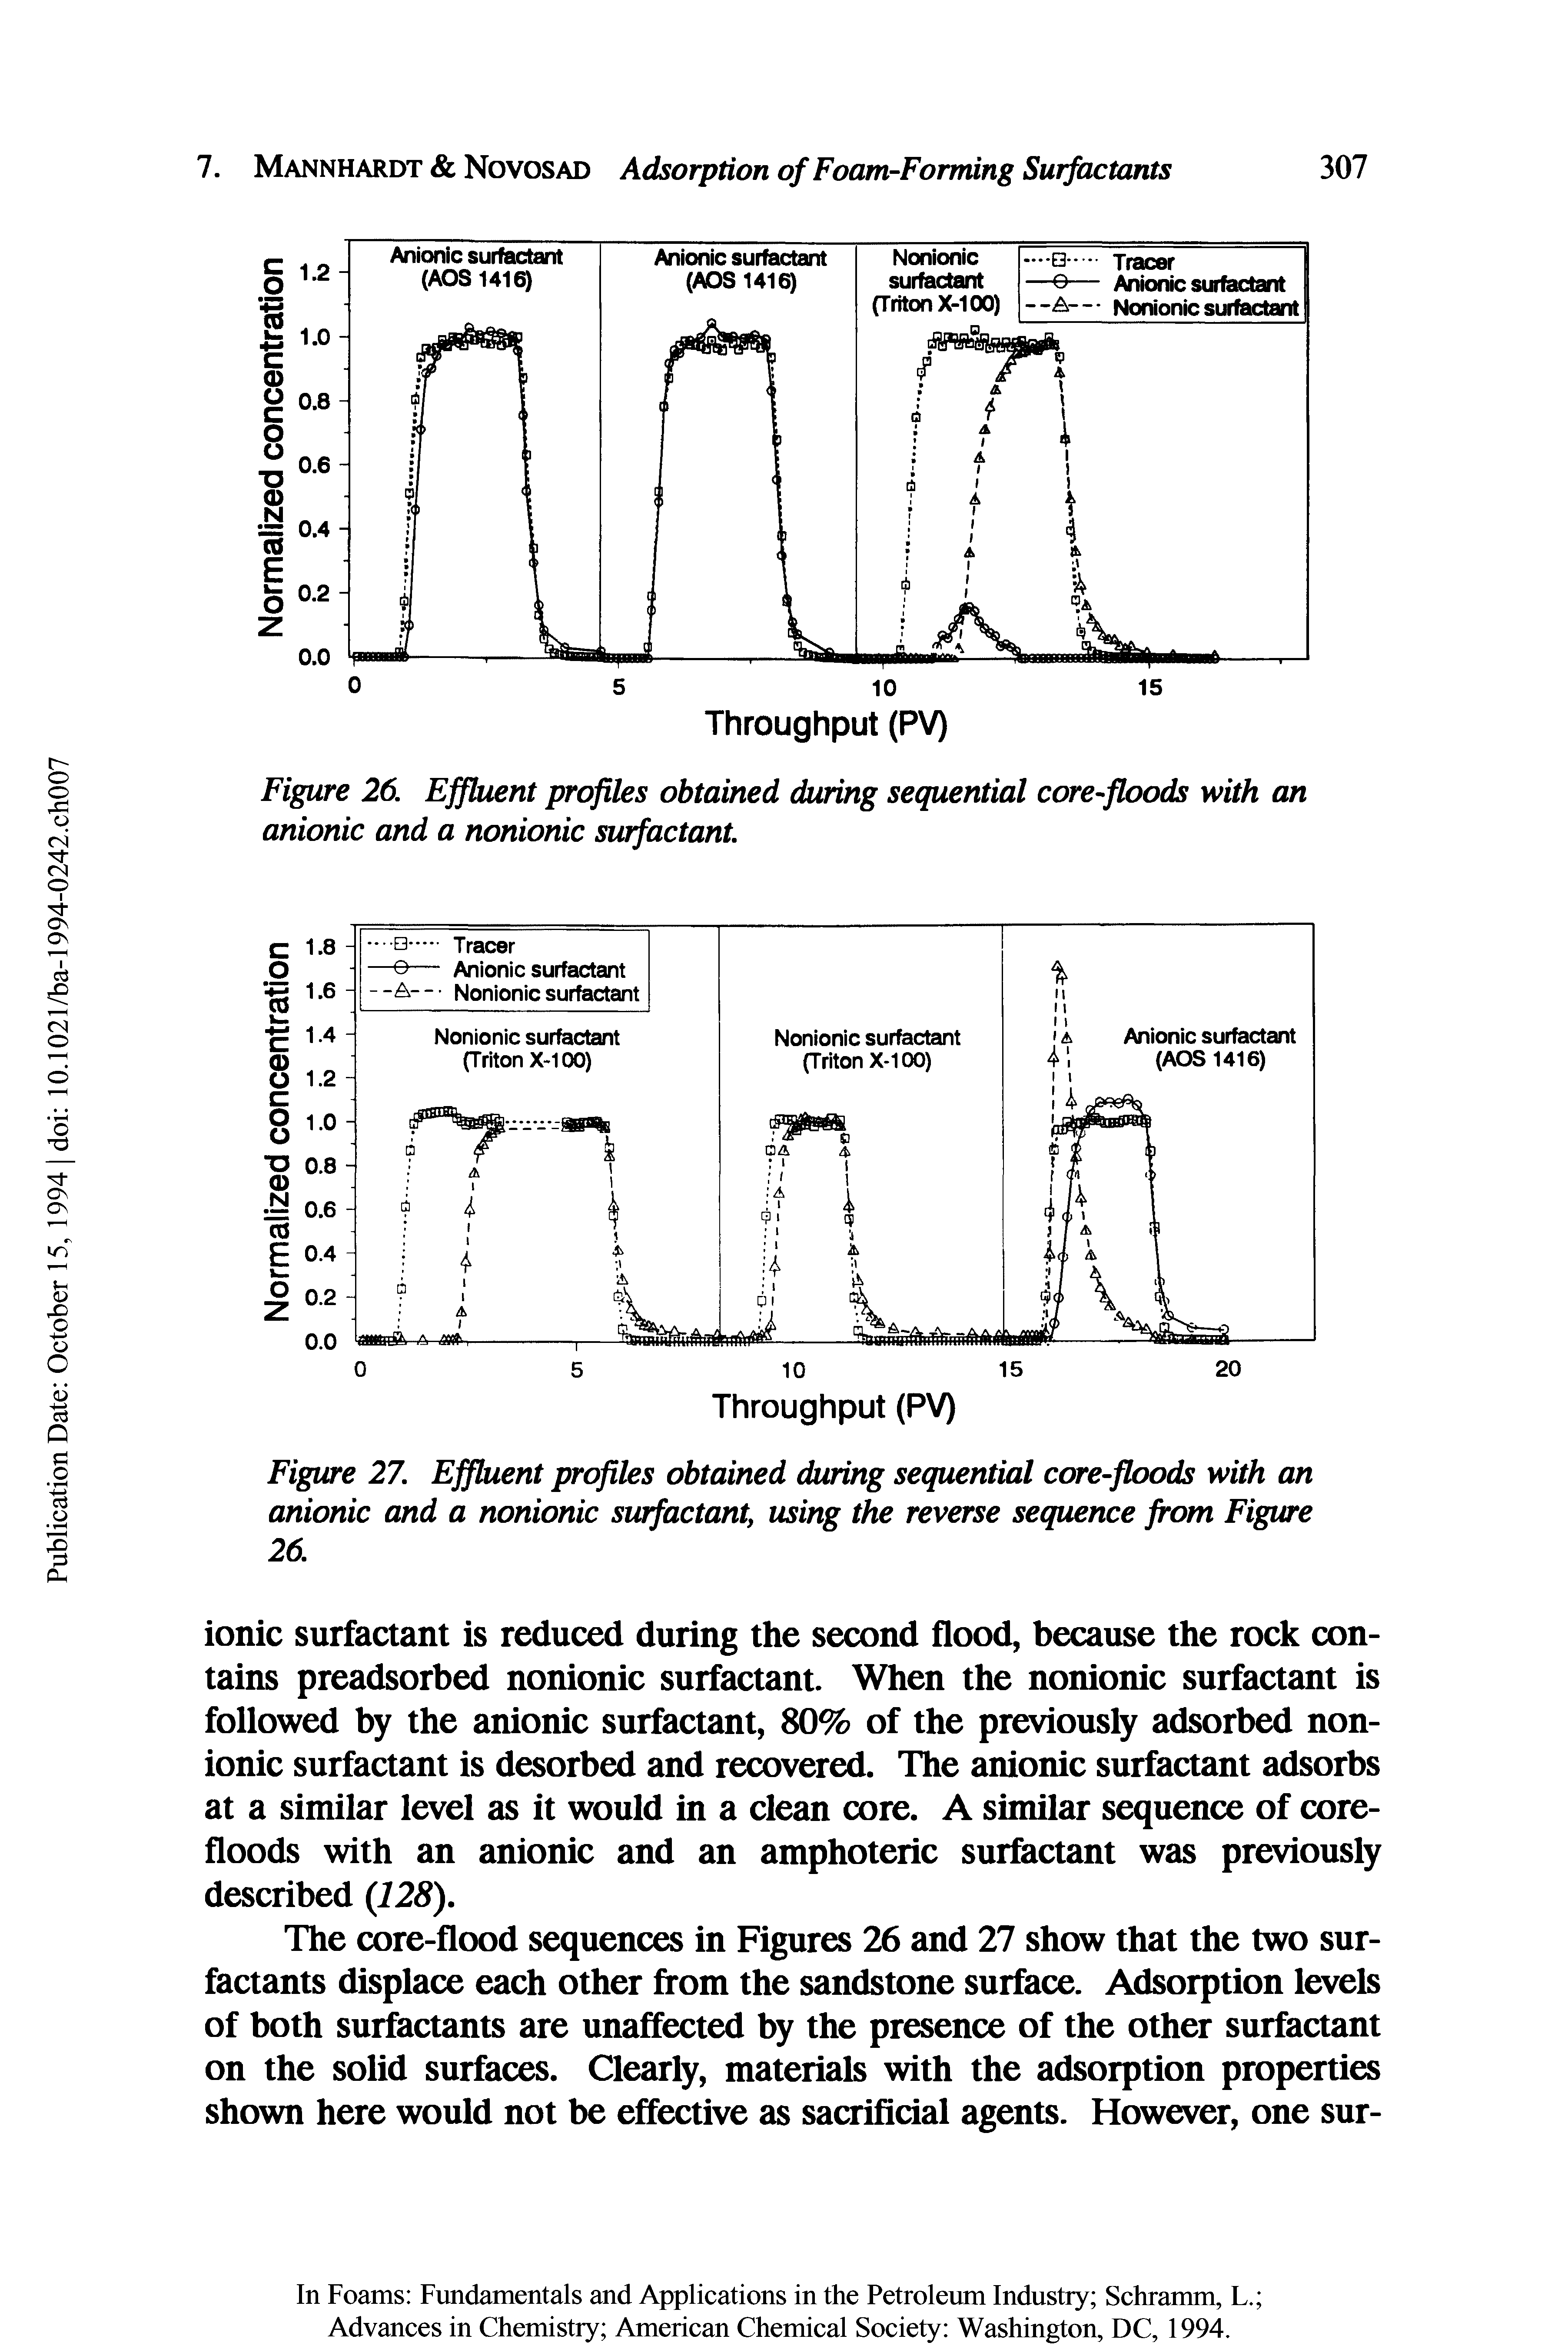 Figure 26. Effluent profiles obtained during sequential core-floods with an anionic and a nonionic surfactant.